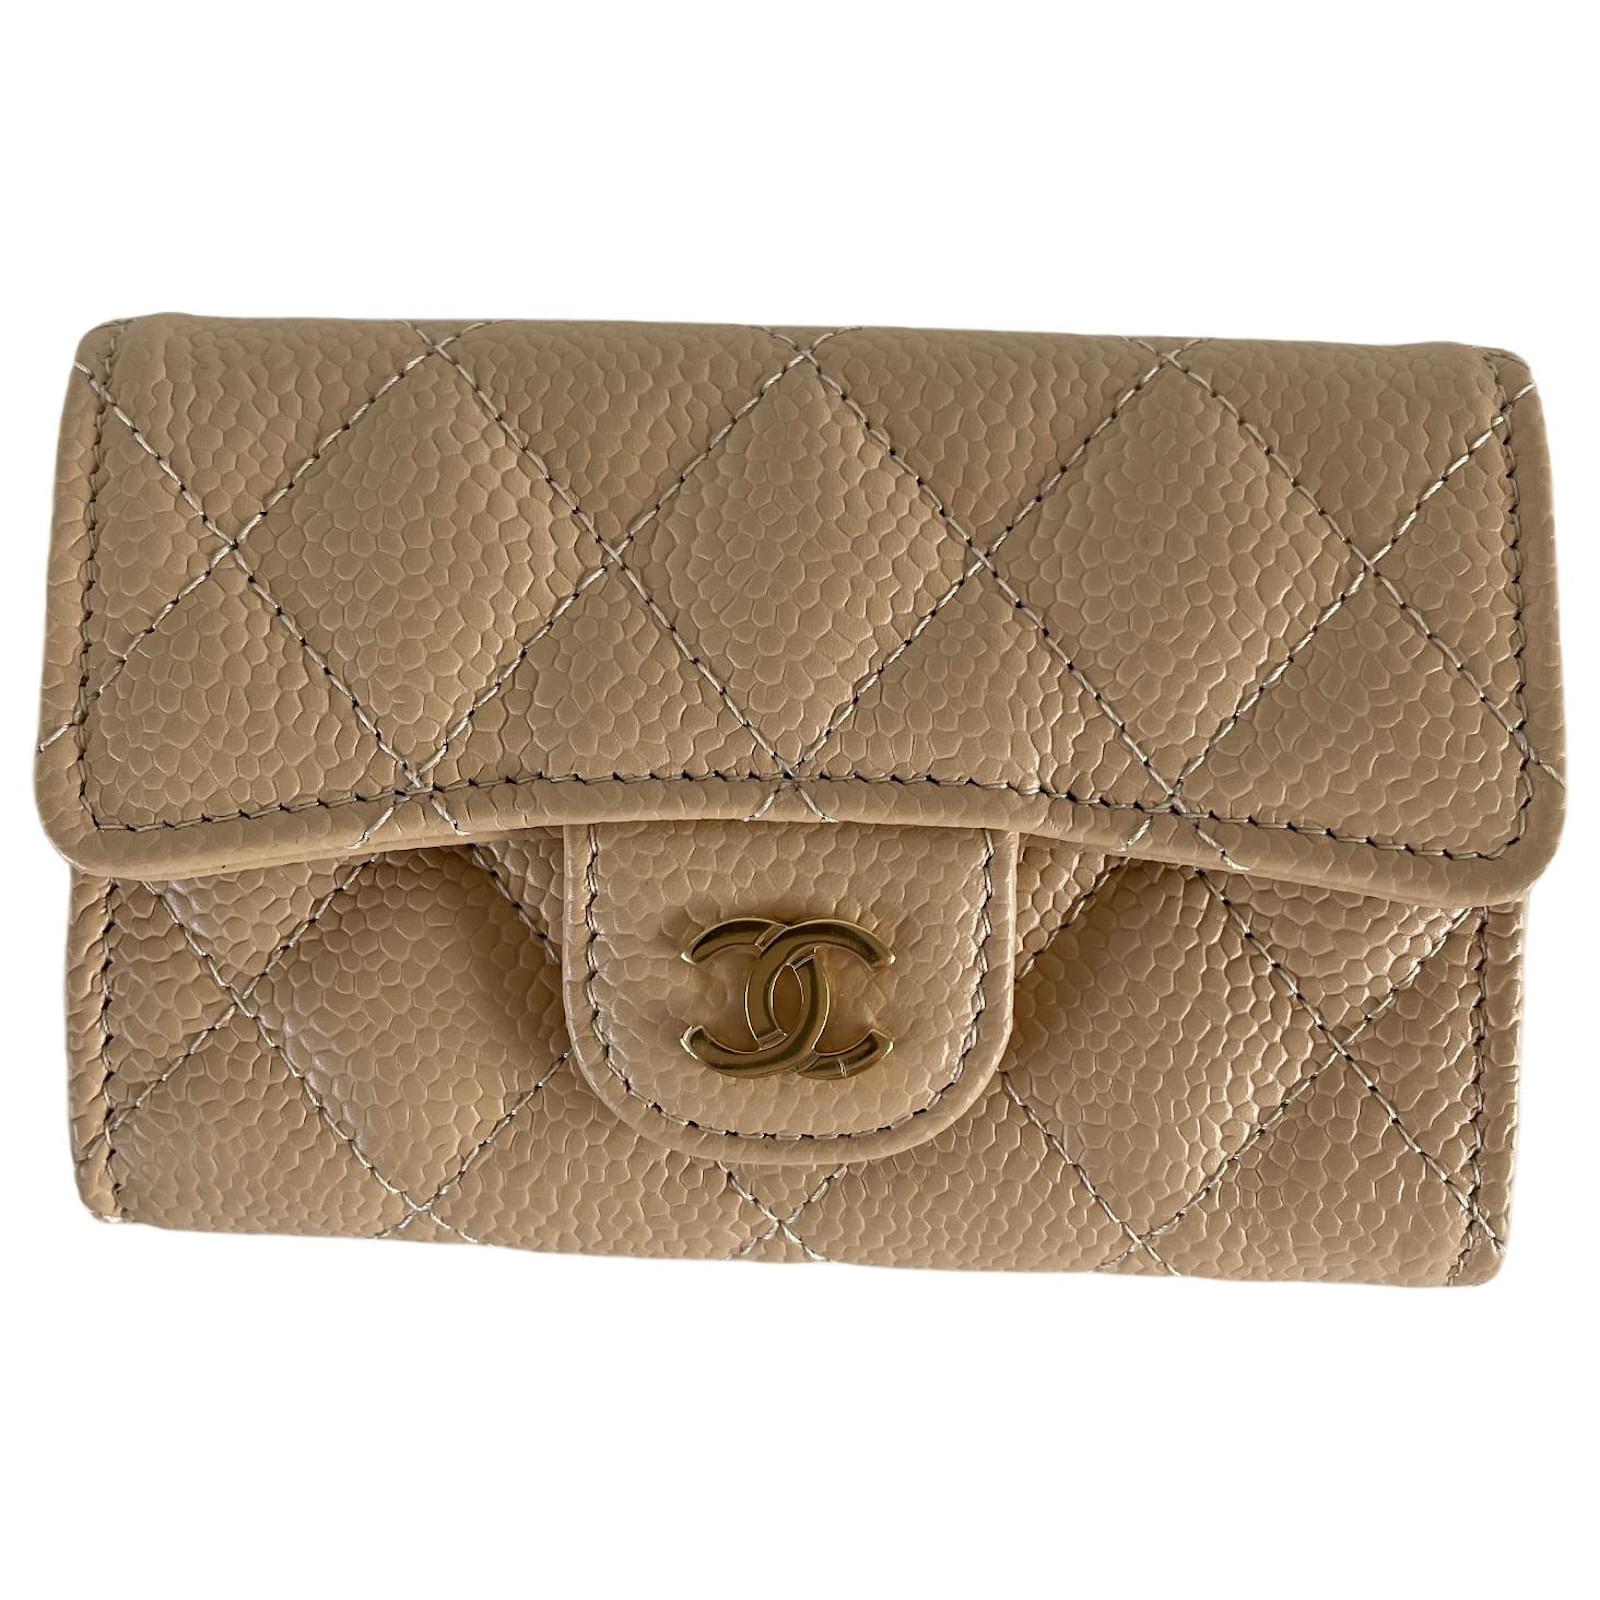 CHANEL, Bags, Chanel 23p Caviar Classic Flap Card Holder